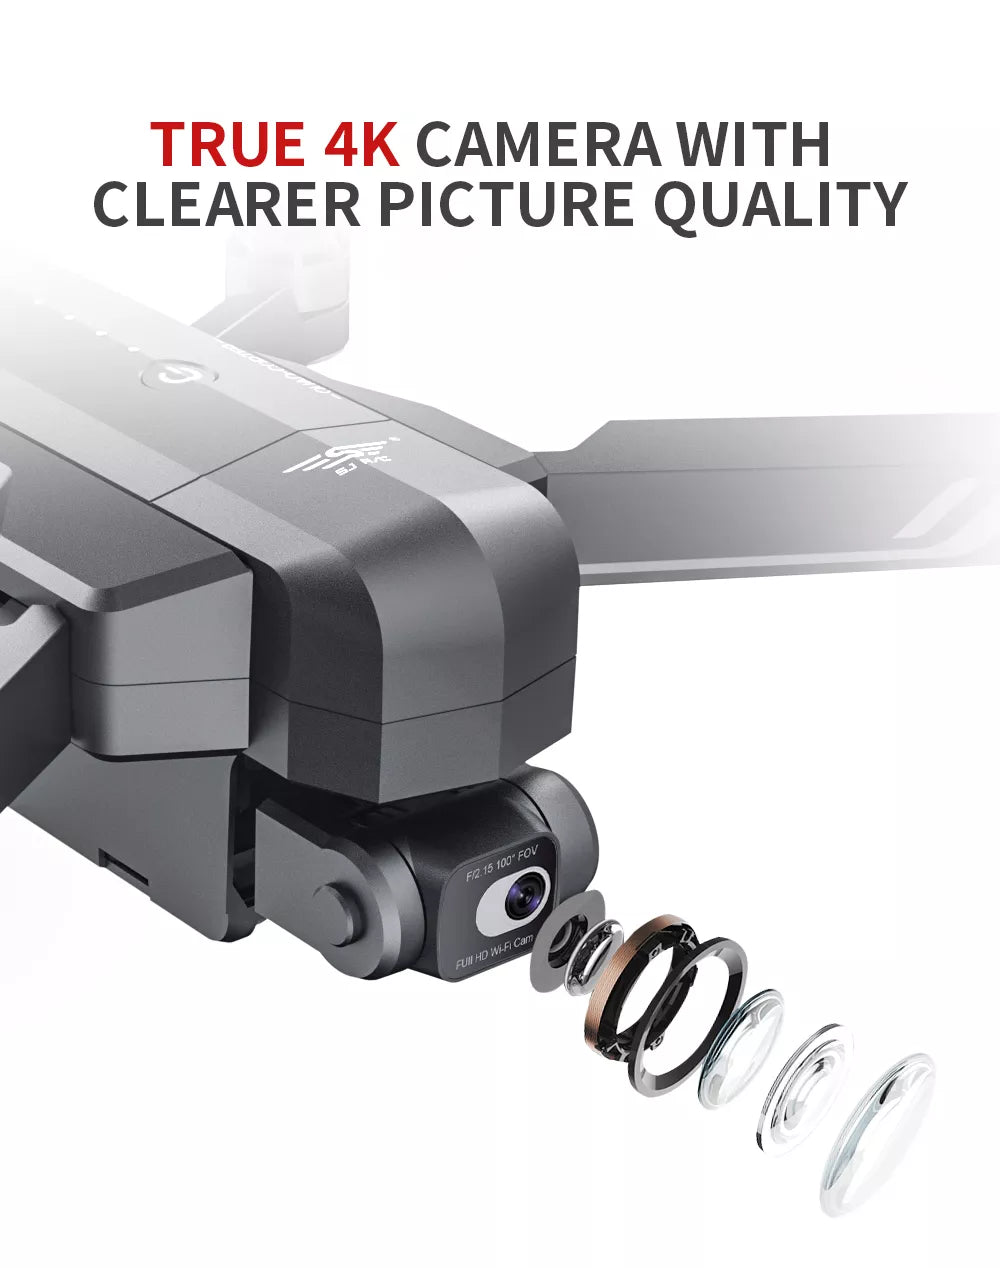 SJRC F11S 4K HD PRO Drone, TRUE 4K CAMERA WITH CLEARER PICTURE QUALITY FO